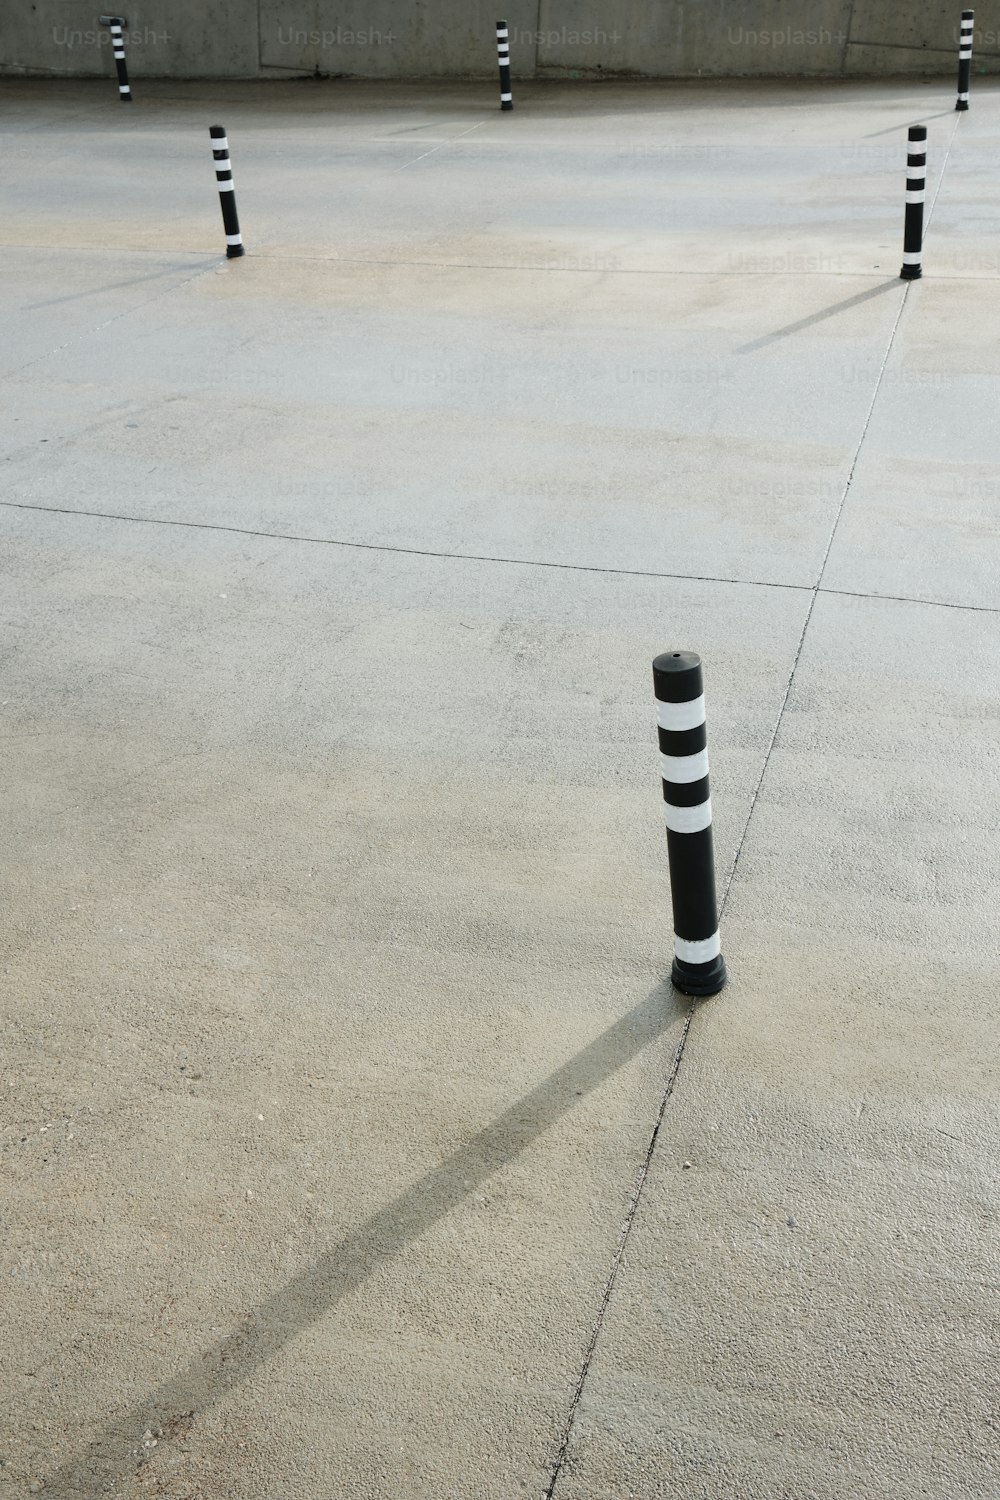 a group of black and white poles in a parking lot